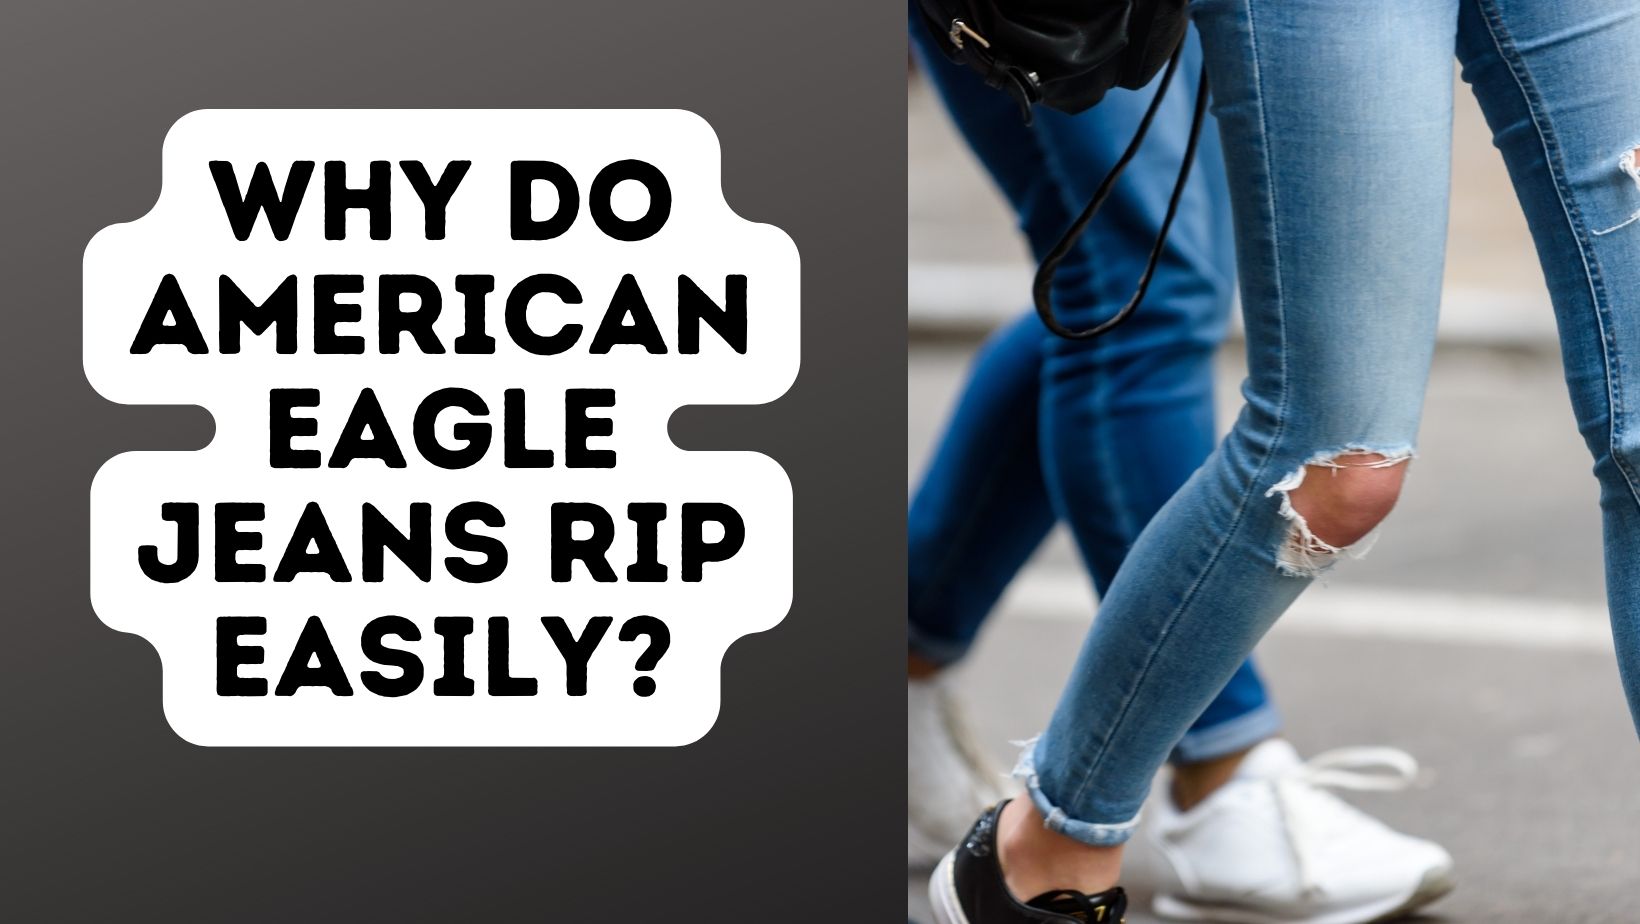 Why Do American Eagle Jeans Rip Easily?